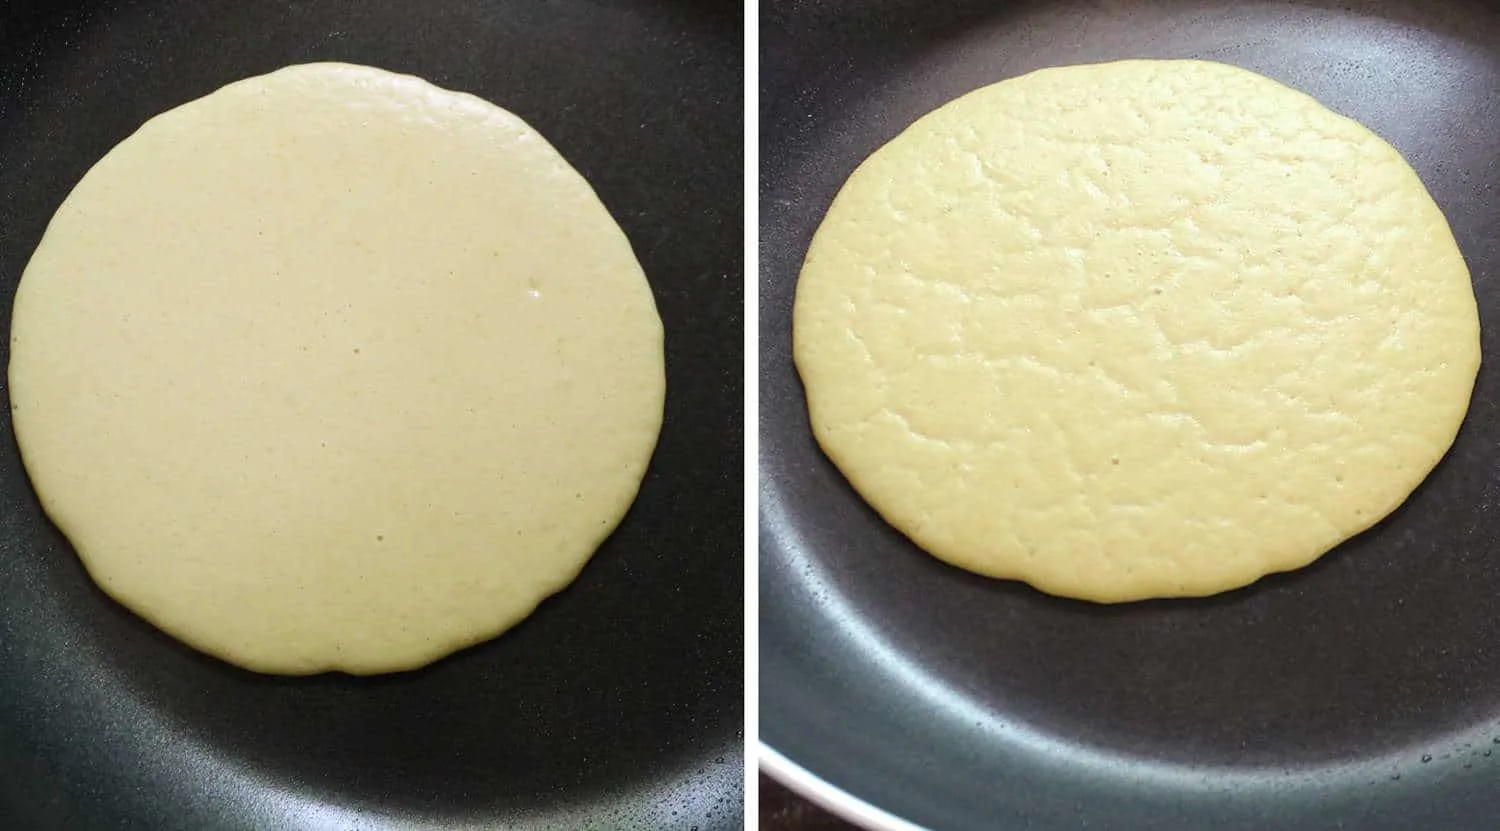 Cook till little "crackles" appear - then flip it for perfectly golden pancakes